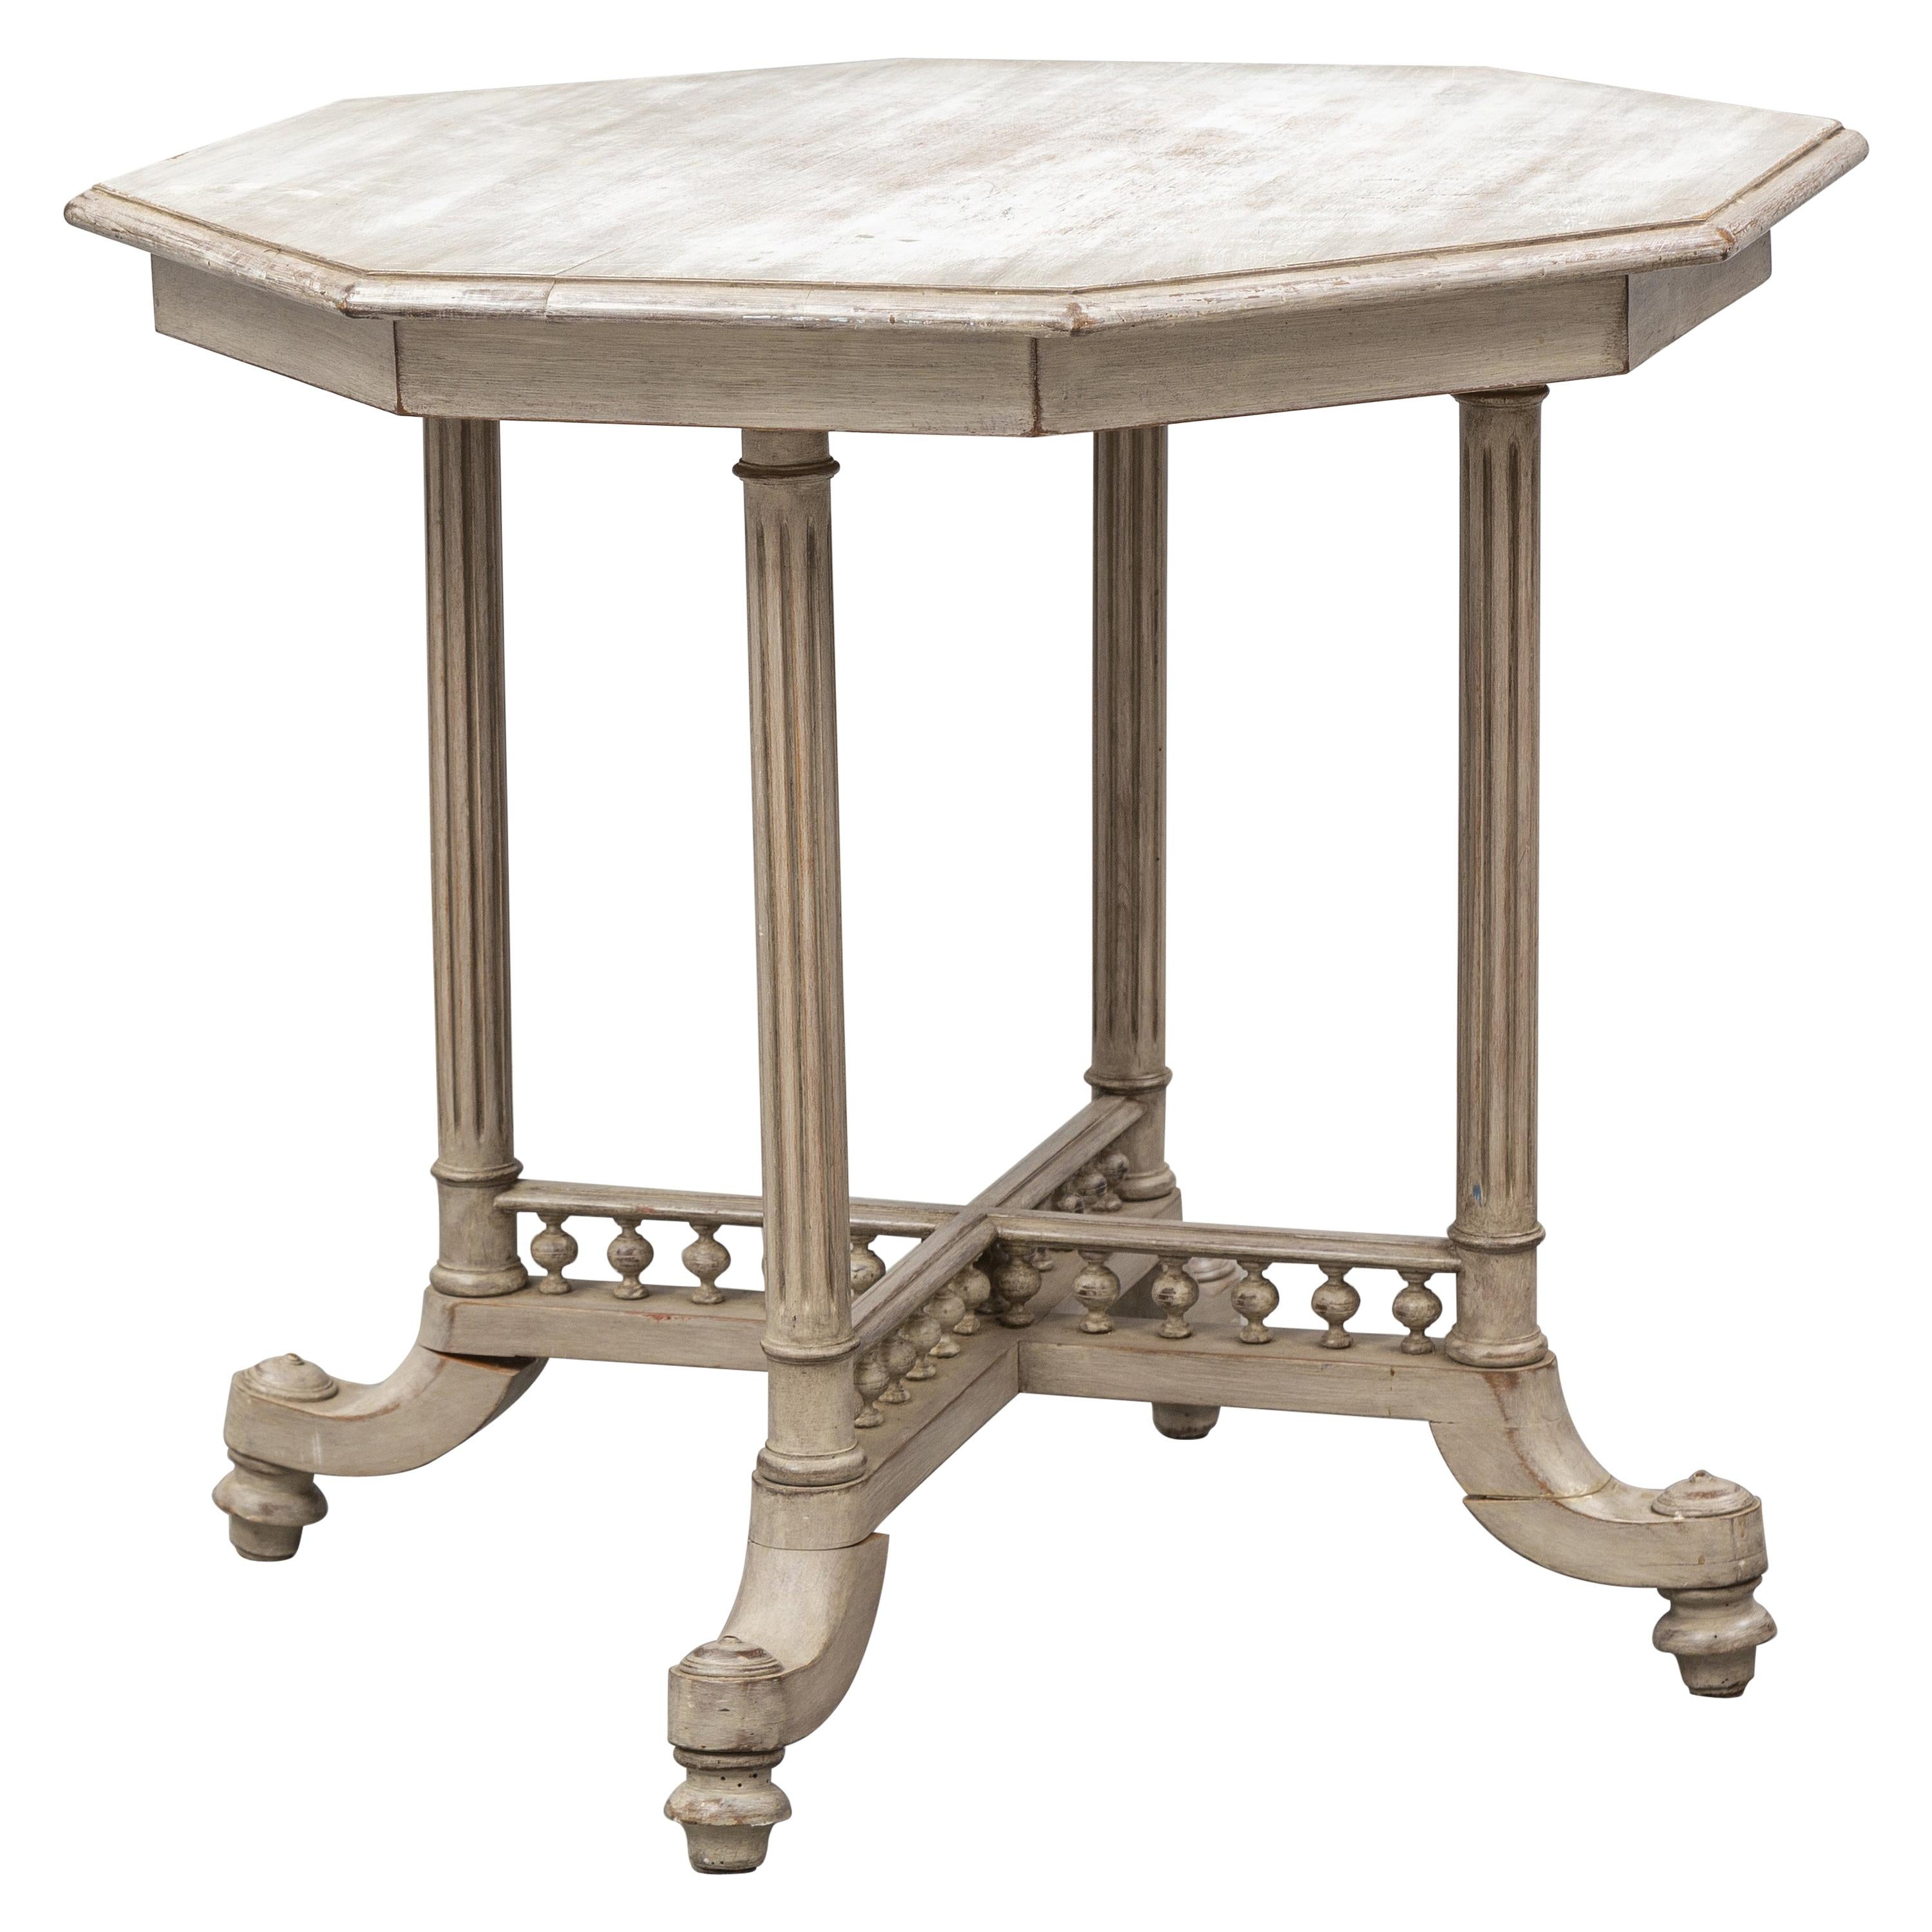 Painted Gustavian Table, Mid-19th Century